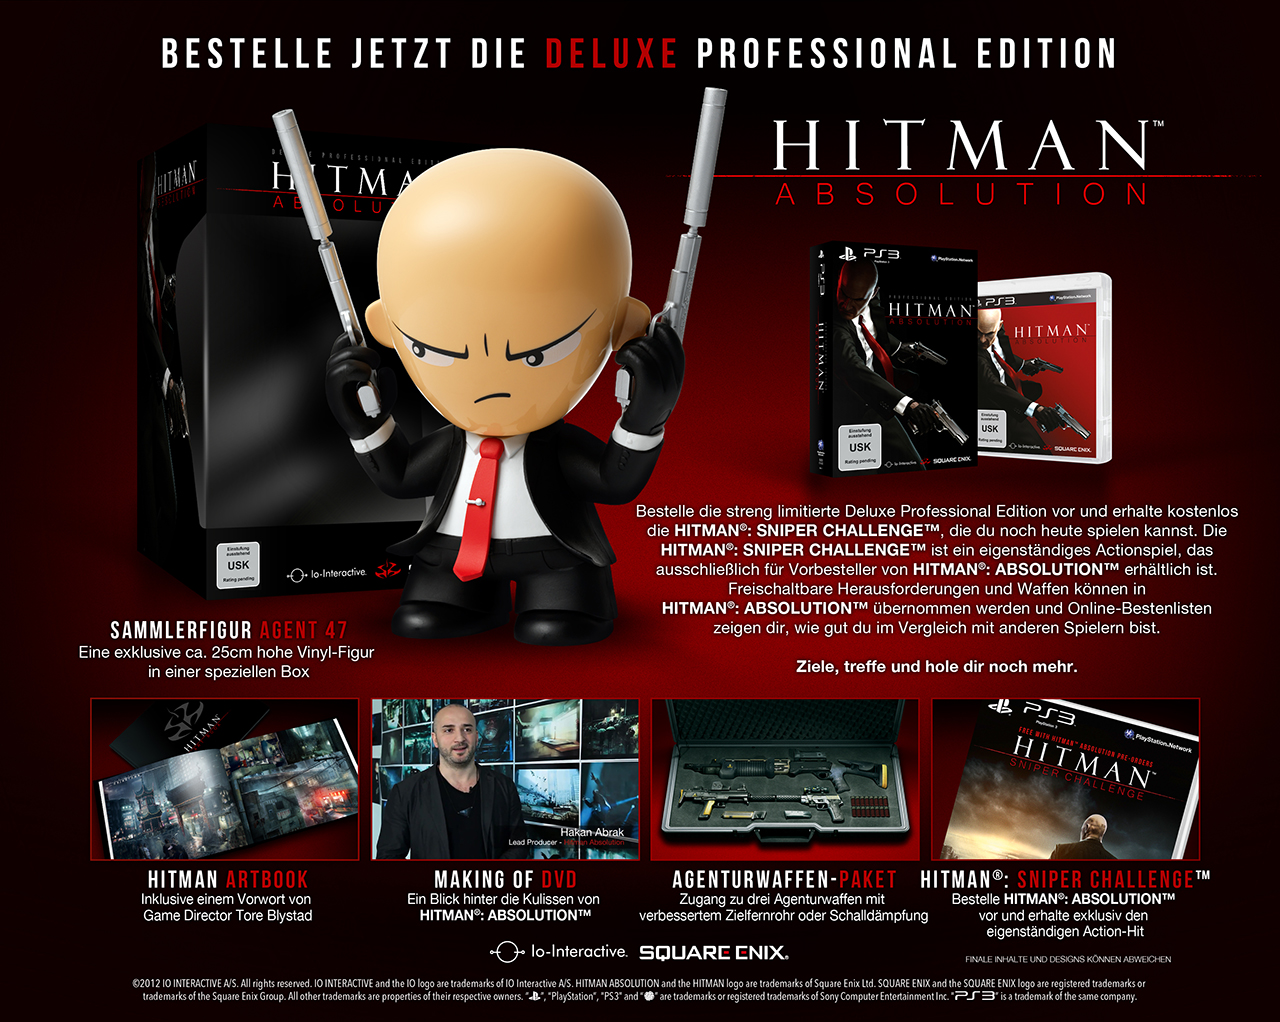 hitman absolution deluxe professional edition - Hitman Absolution: (Deluxe) Professional Editions angekündigt